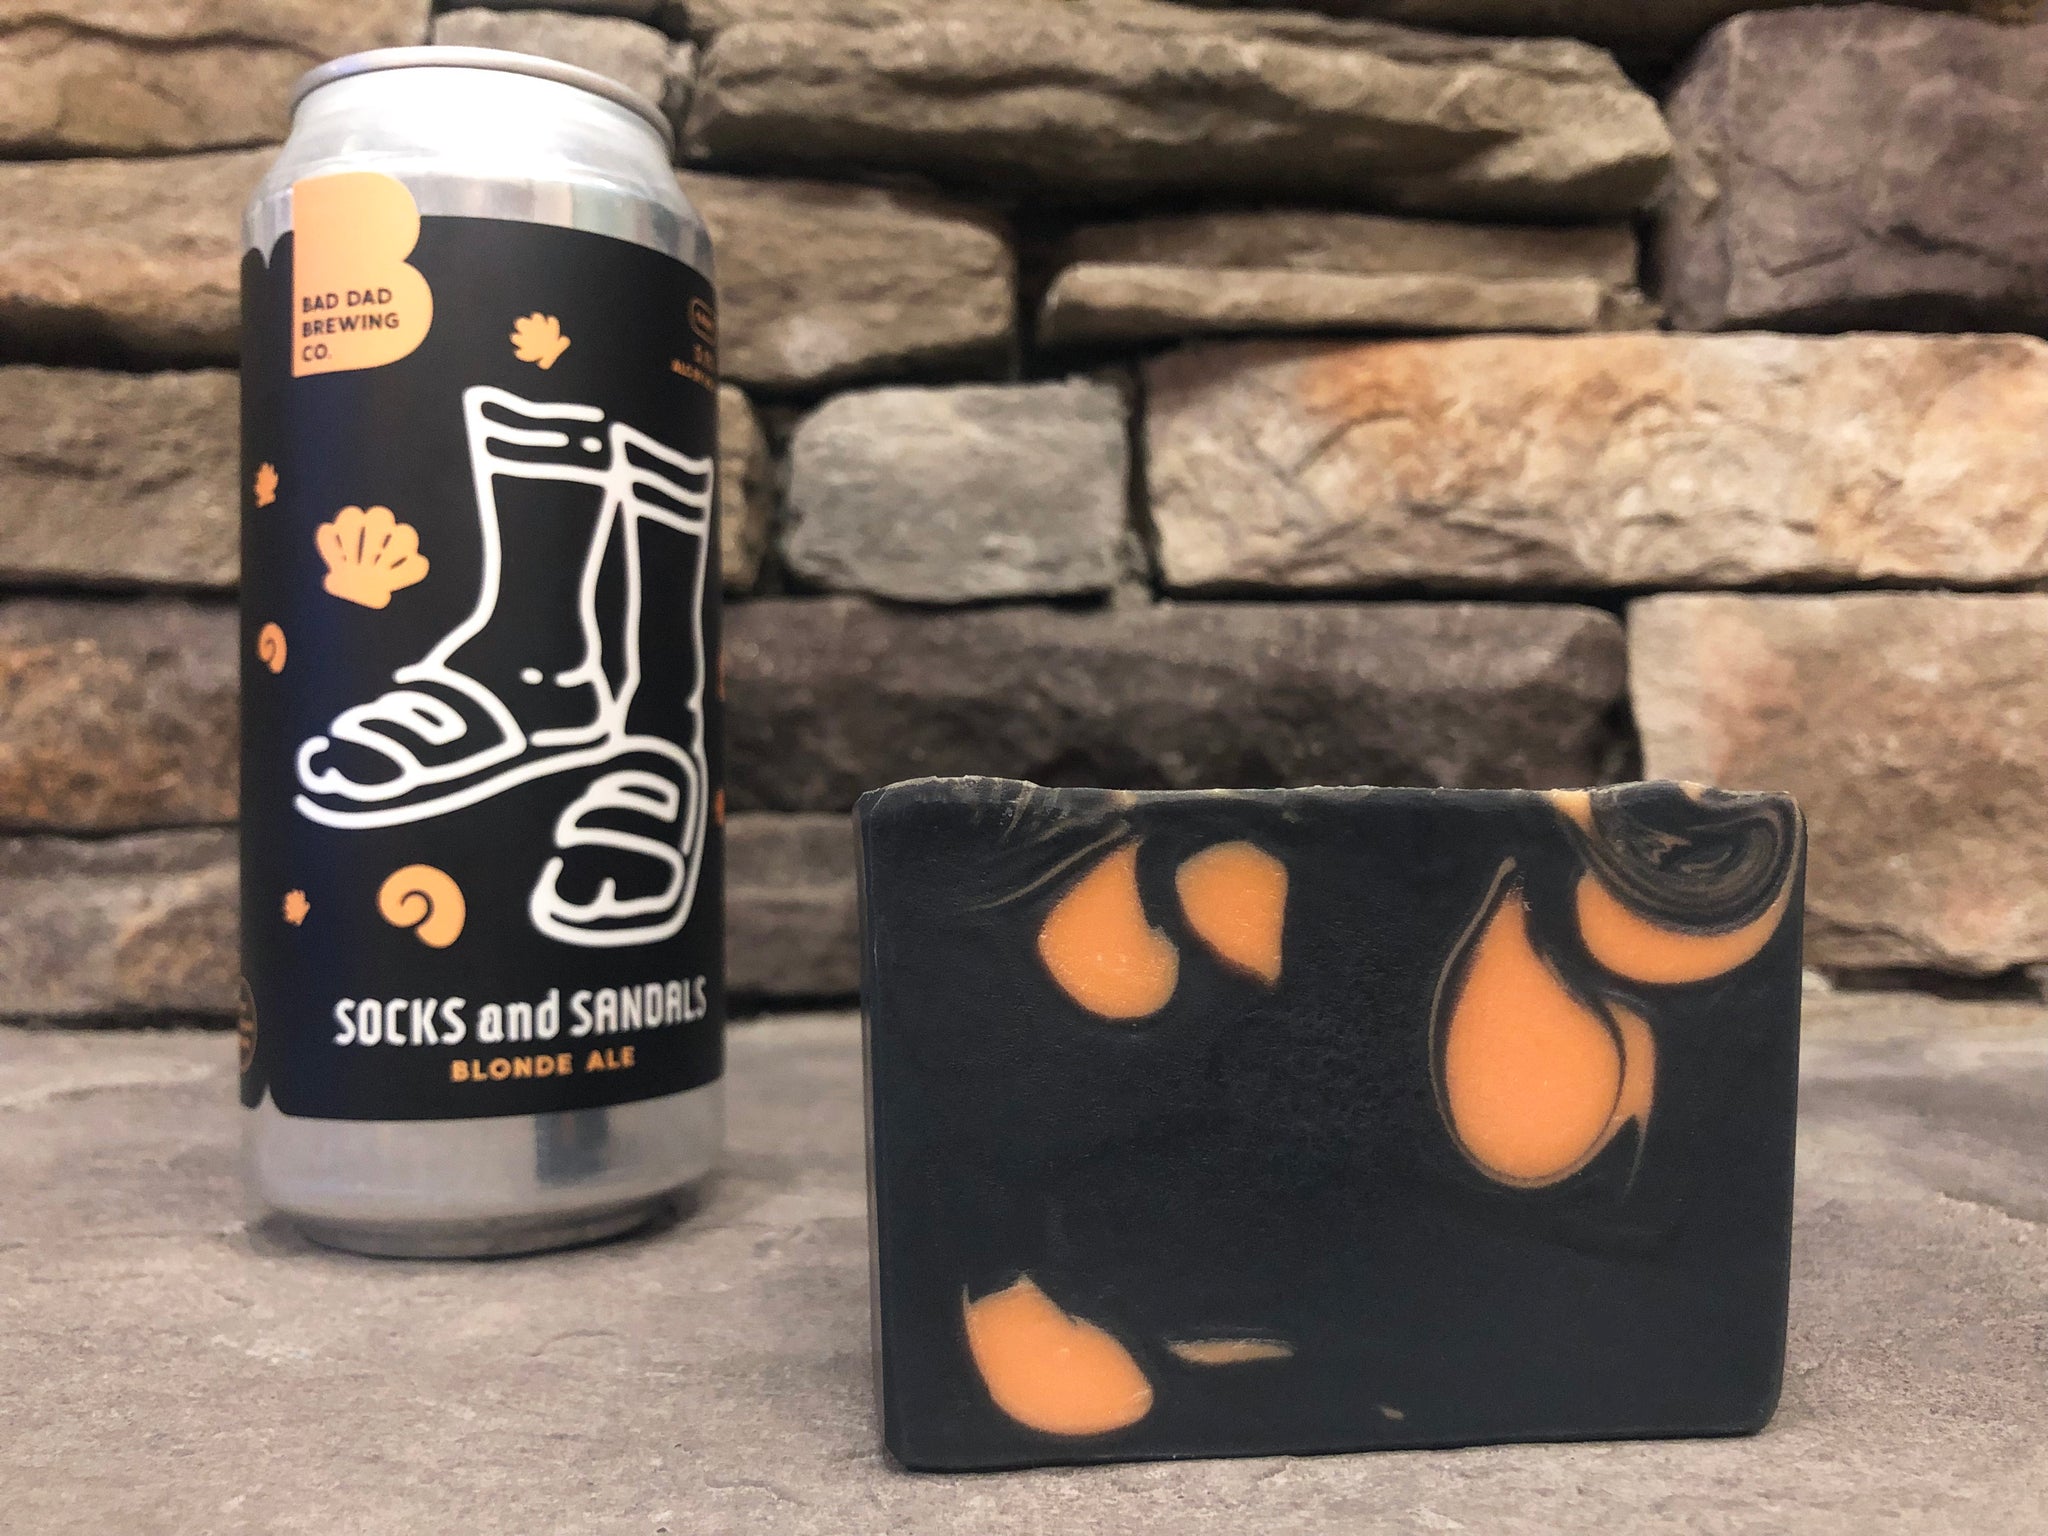  indiana beer soap for sale handcrafted with socks and sandals blonde ale from bad dad brewing co Fairmount indiana craft brewery black and orange beer soap for him with activated charcoal fresh cut grass scented soap craft beer soaps by spunkndisorderly black and orange swirl beer soap